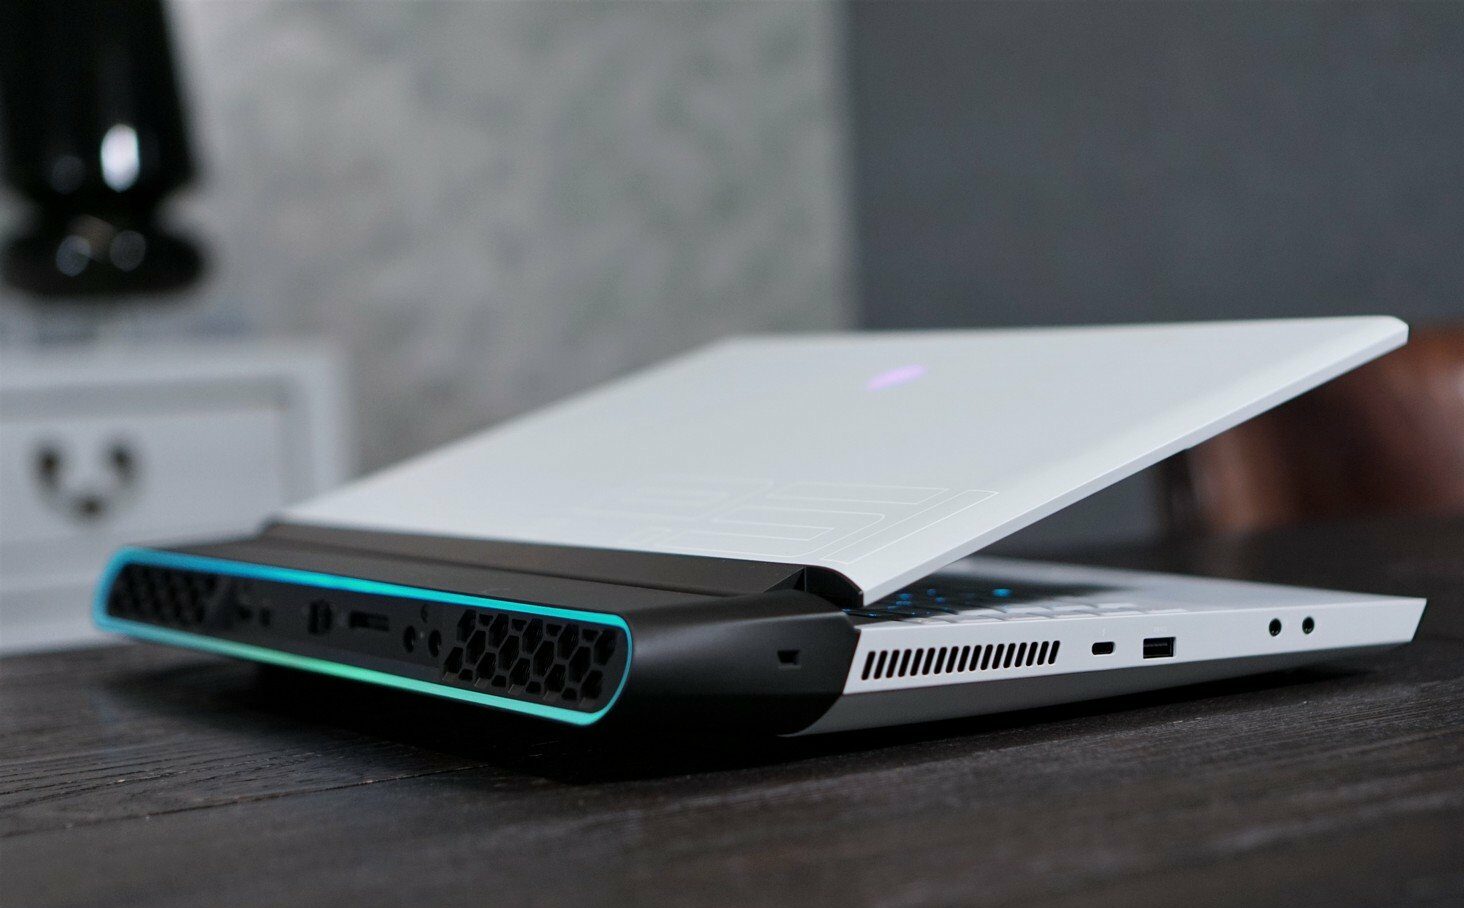 Alienware Area51 Gaming Laptop That Perform Like Desktop The World's